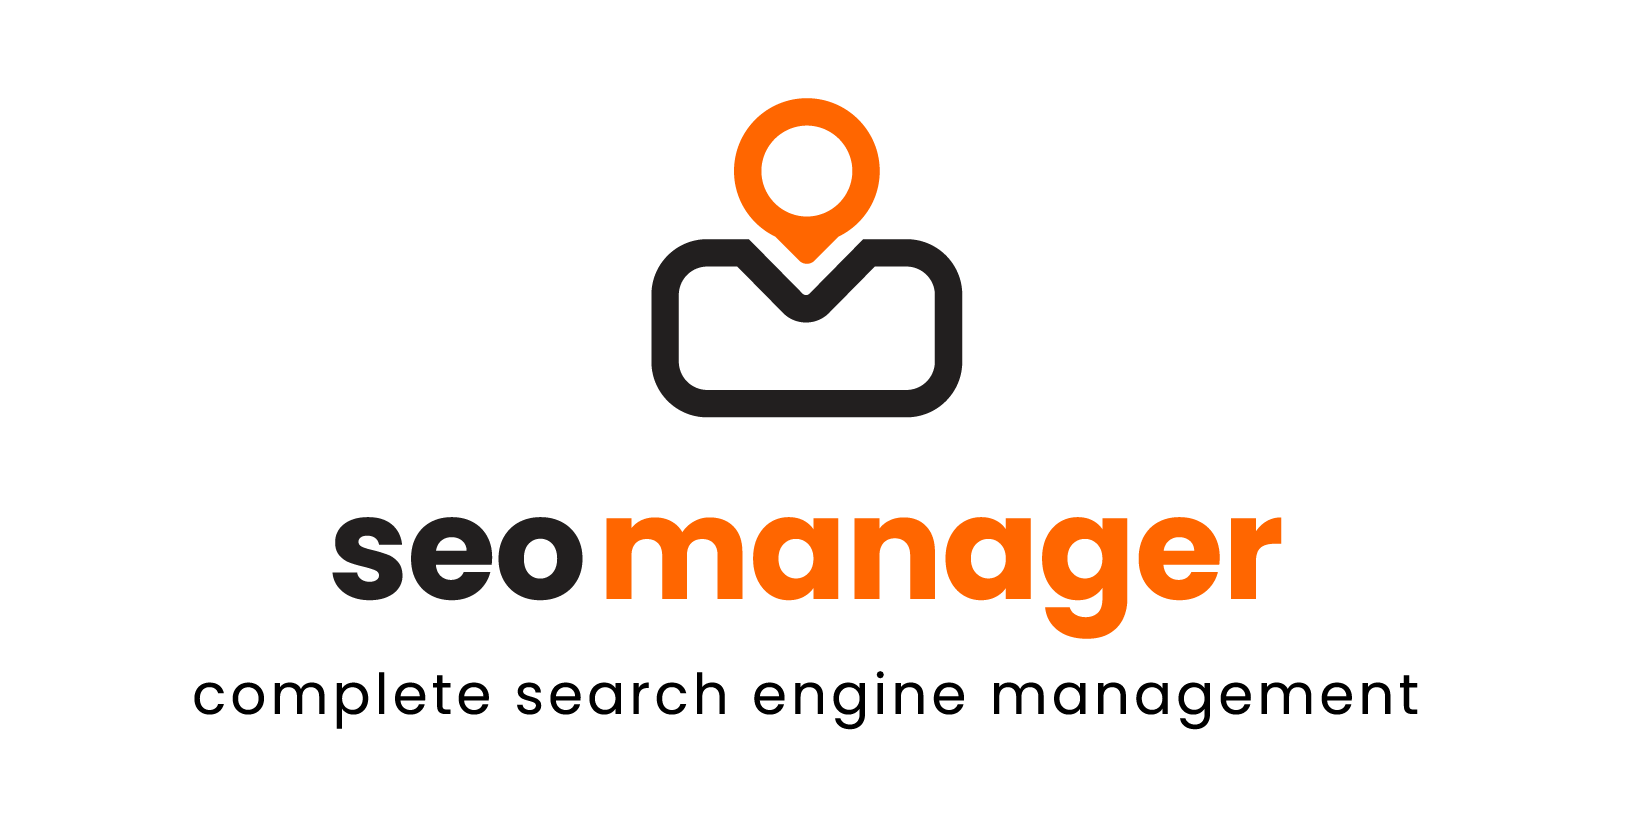 SEO Manager - Complete search engine management